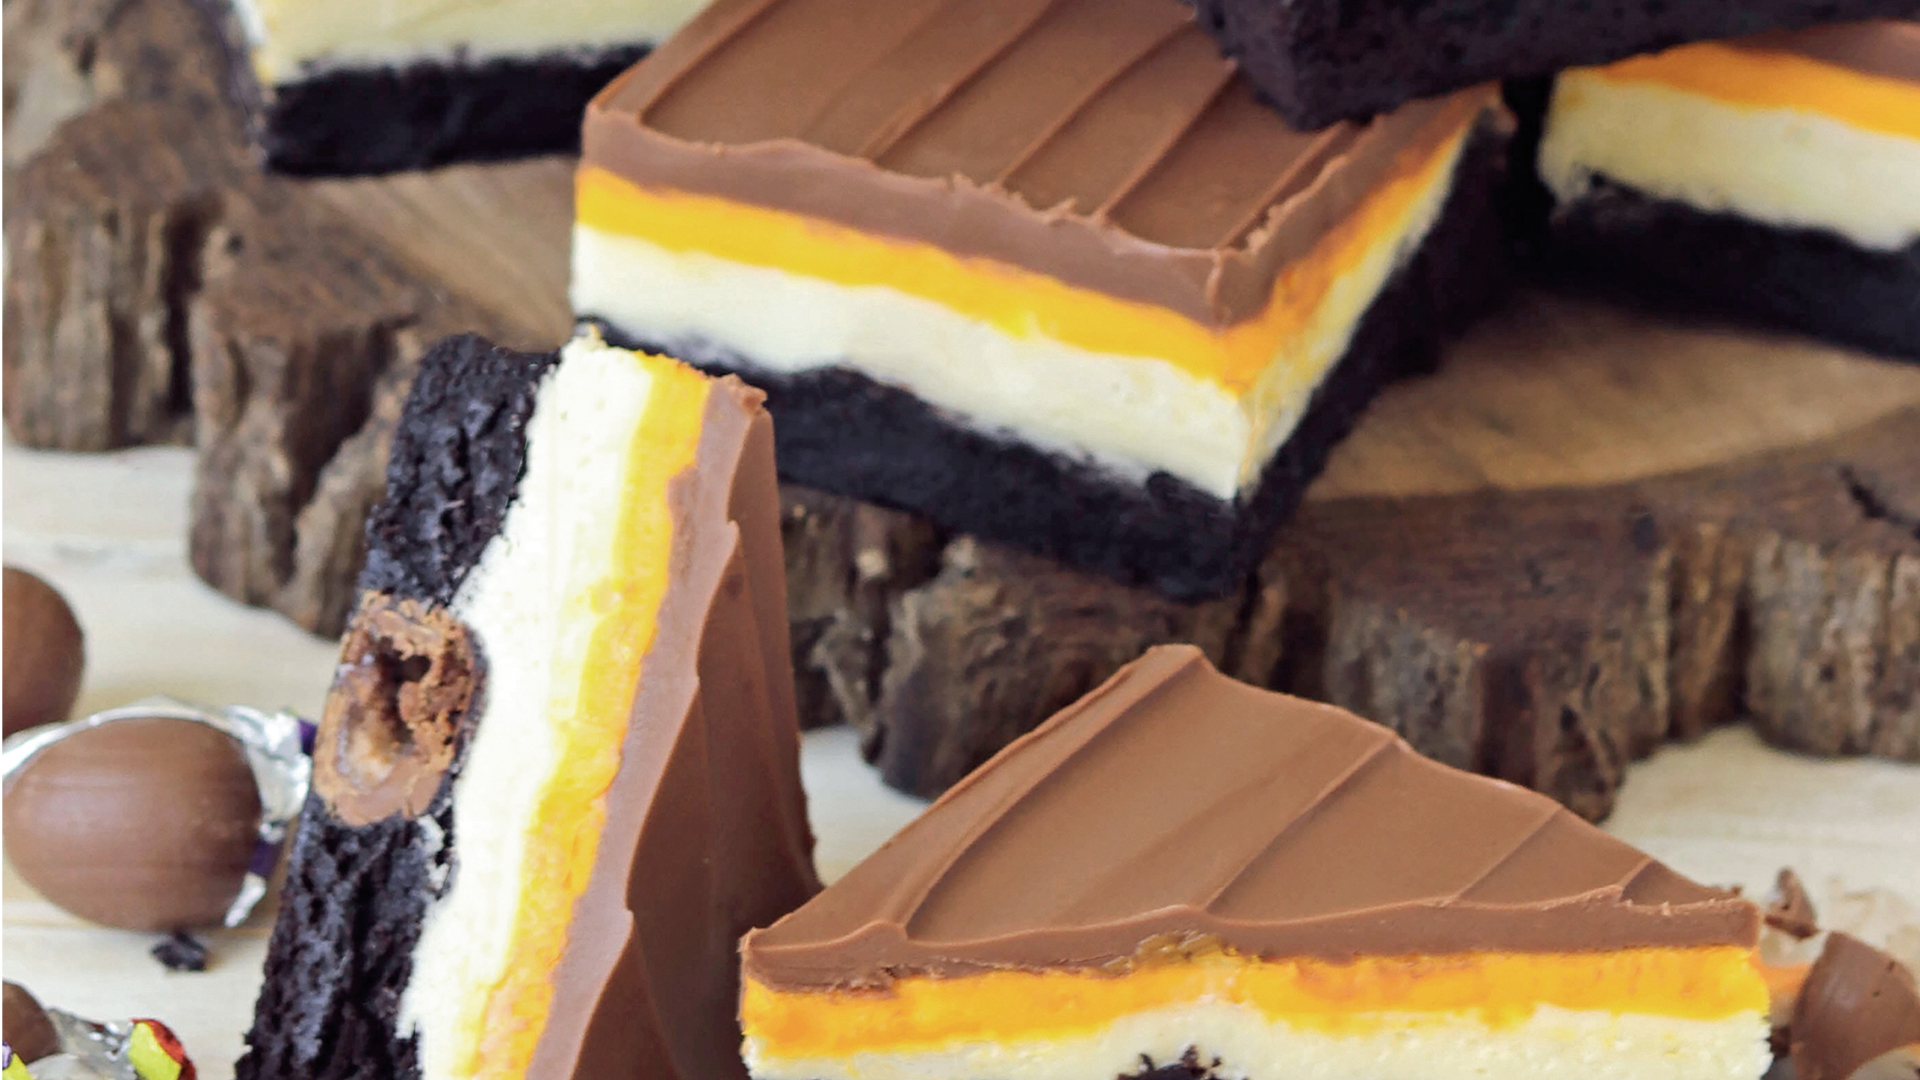 The cream egg brownies